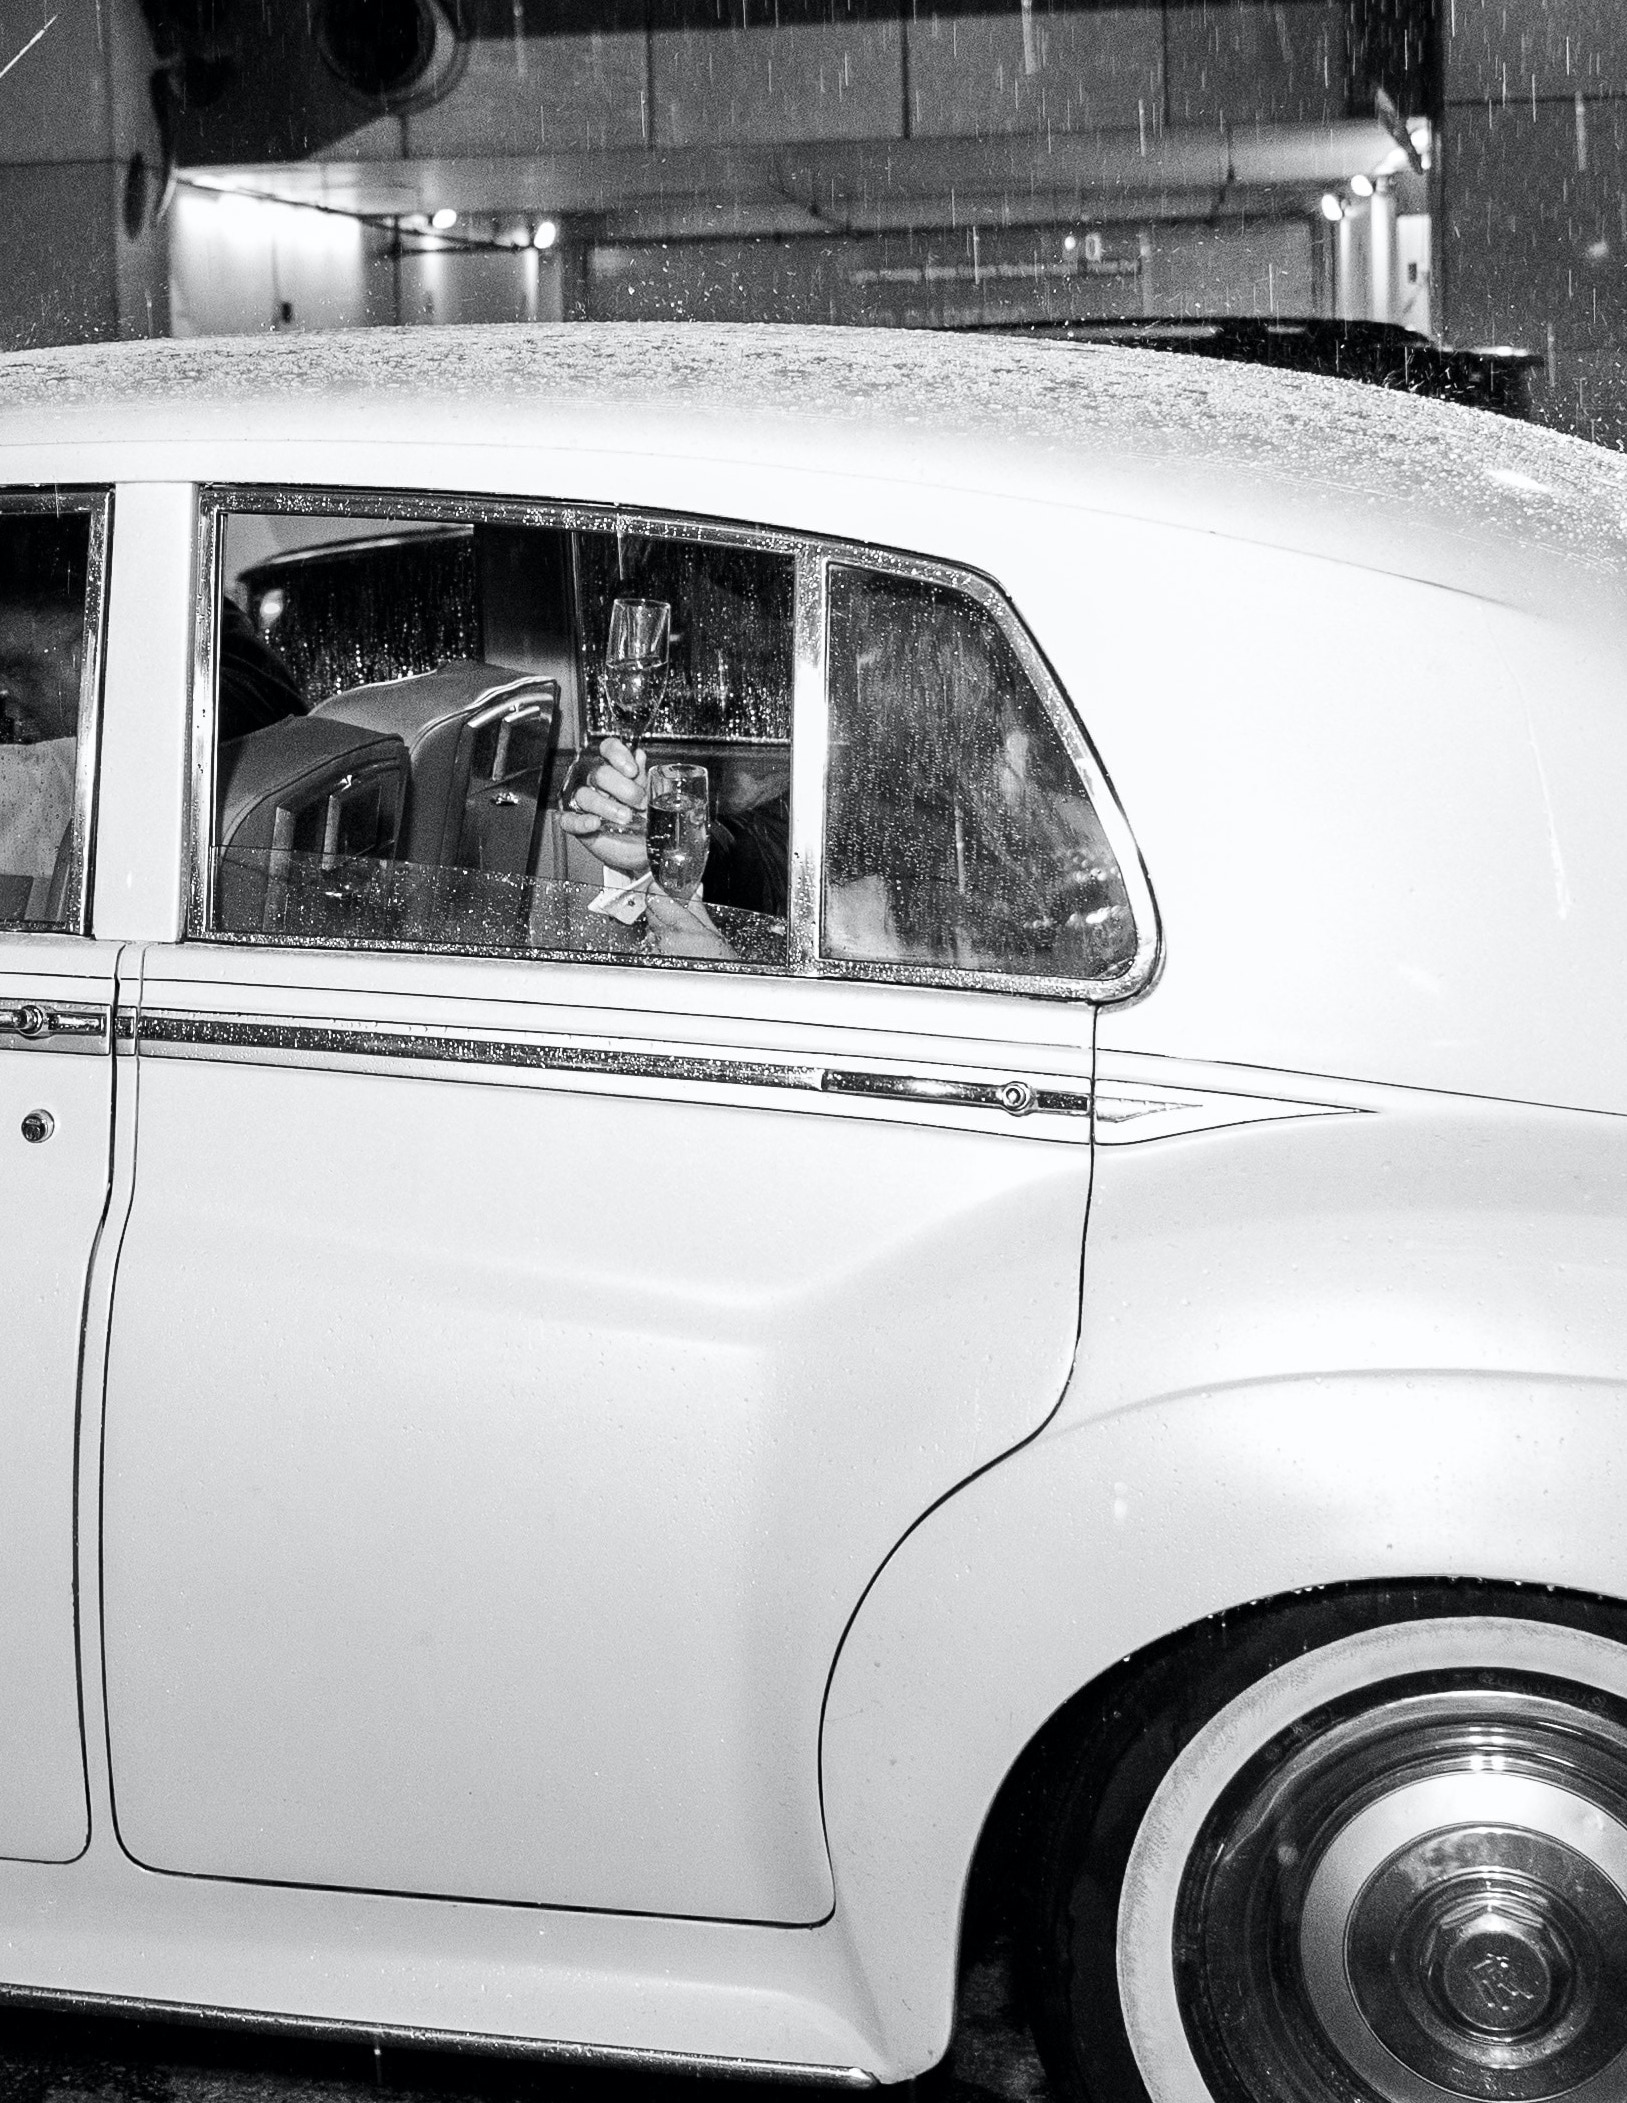 The bride and groom are sitting in the back of a Rolls Royce clinking champagne glasses.